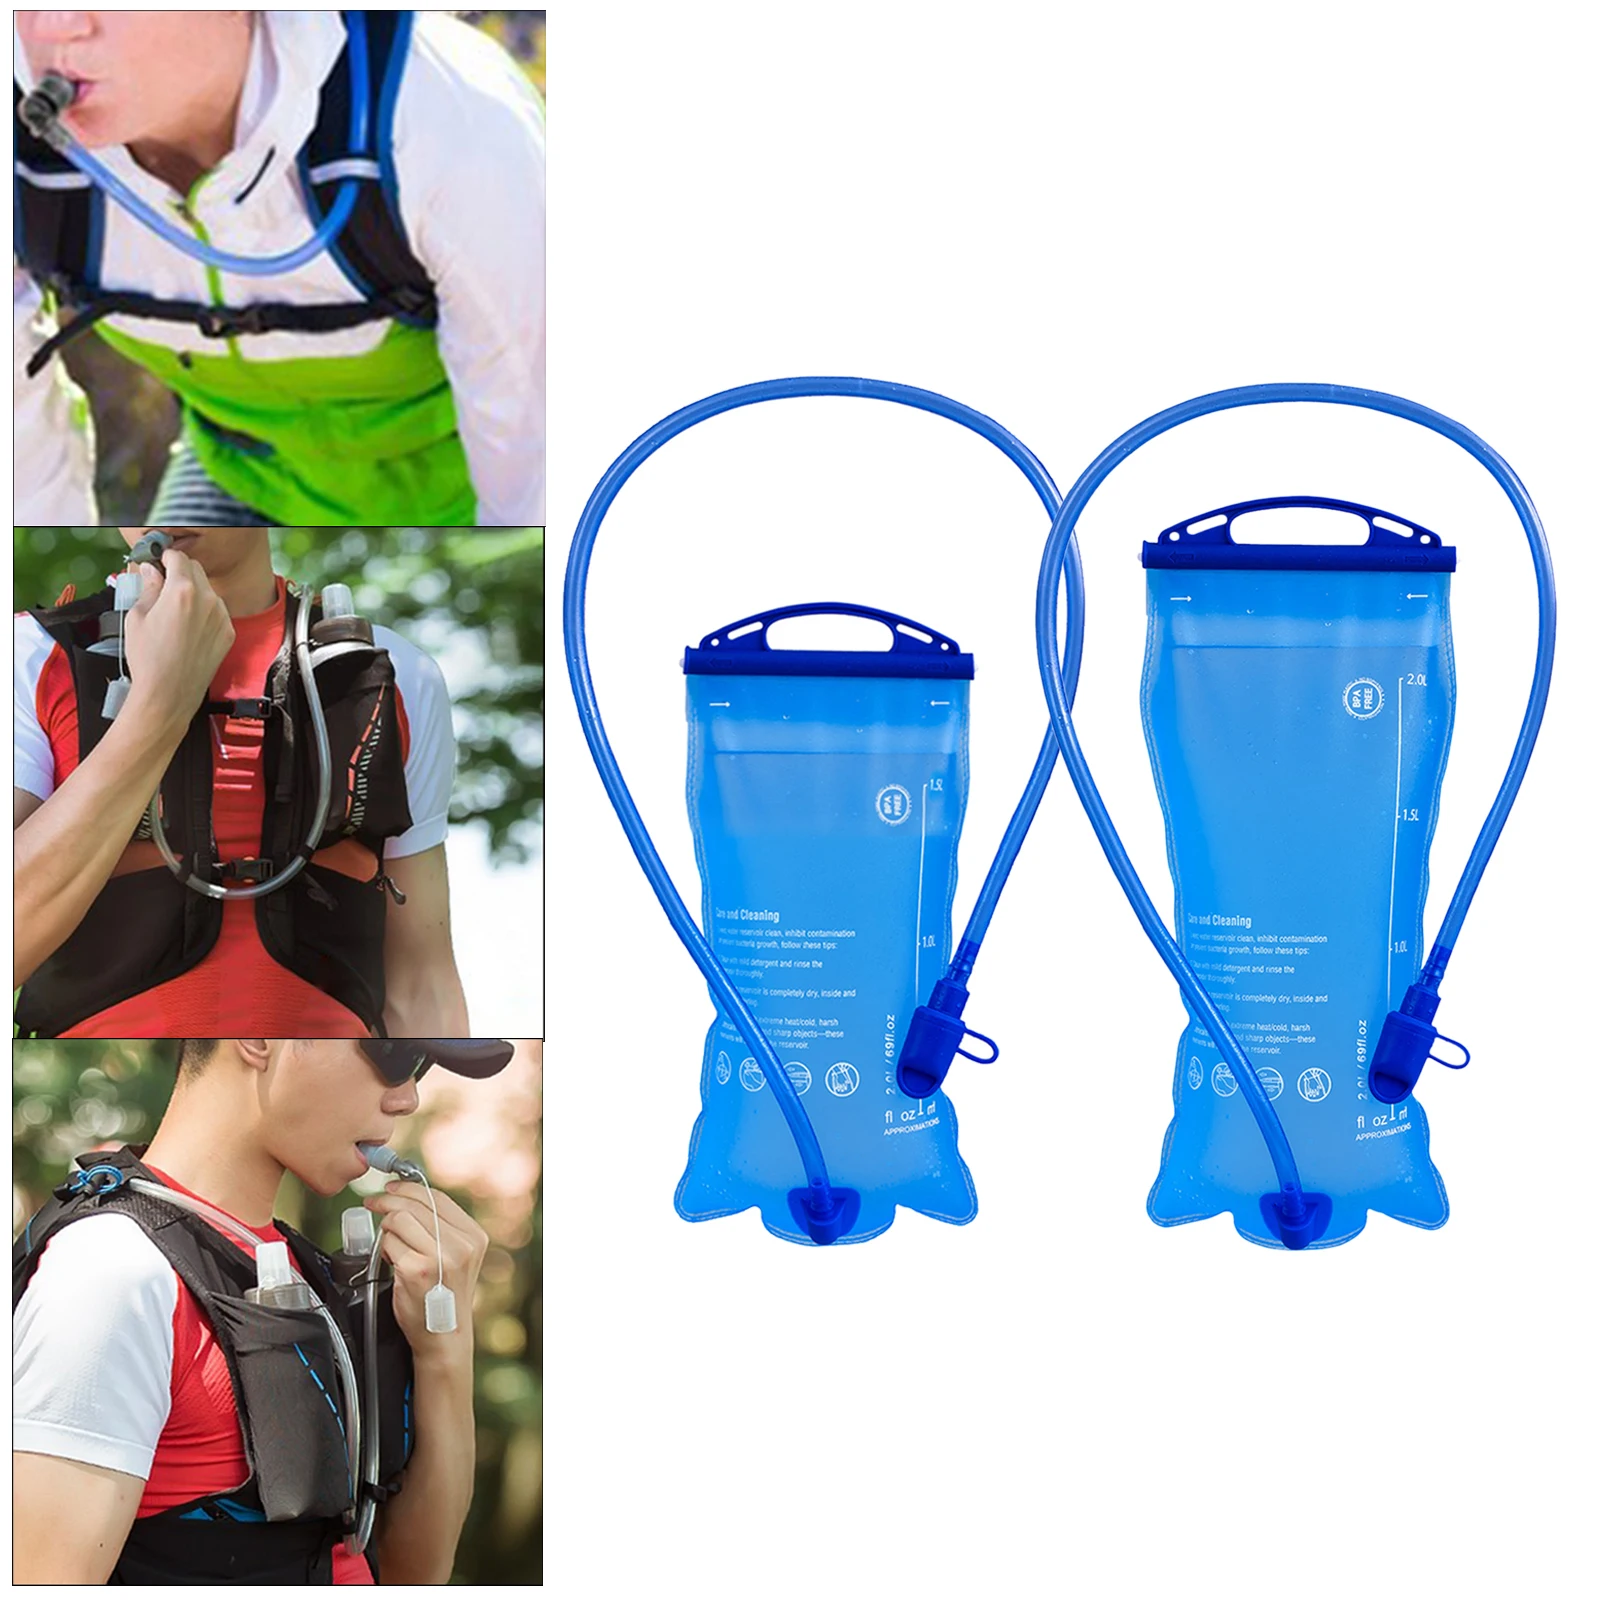 1.5-2L BPA Free Hydration Bladder Water Reservoir Storage Bag for Bicycling Hiking Camping Backpack Running Outdoor Sports